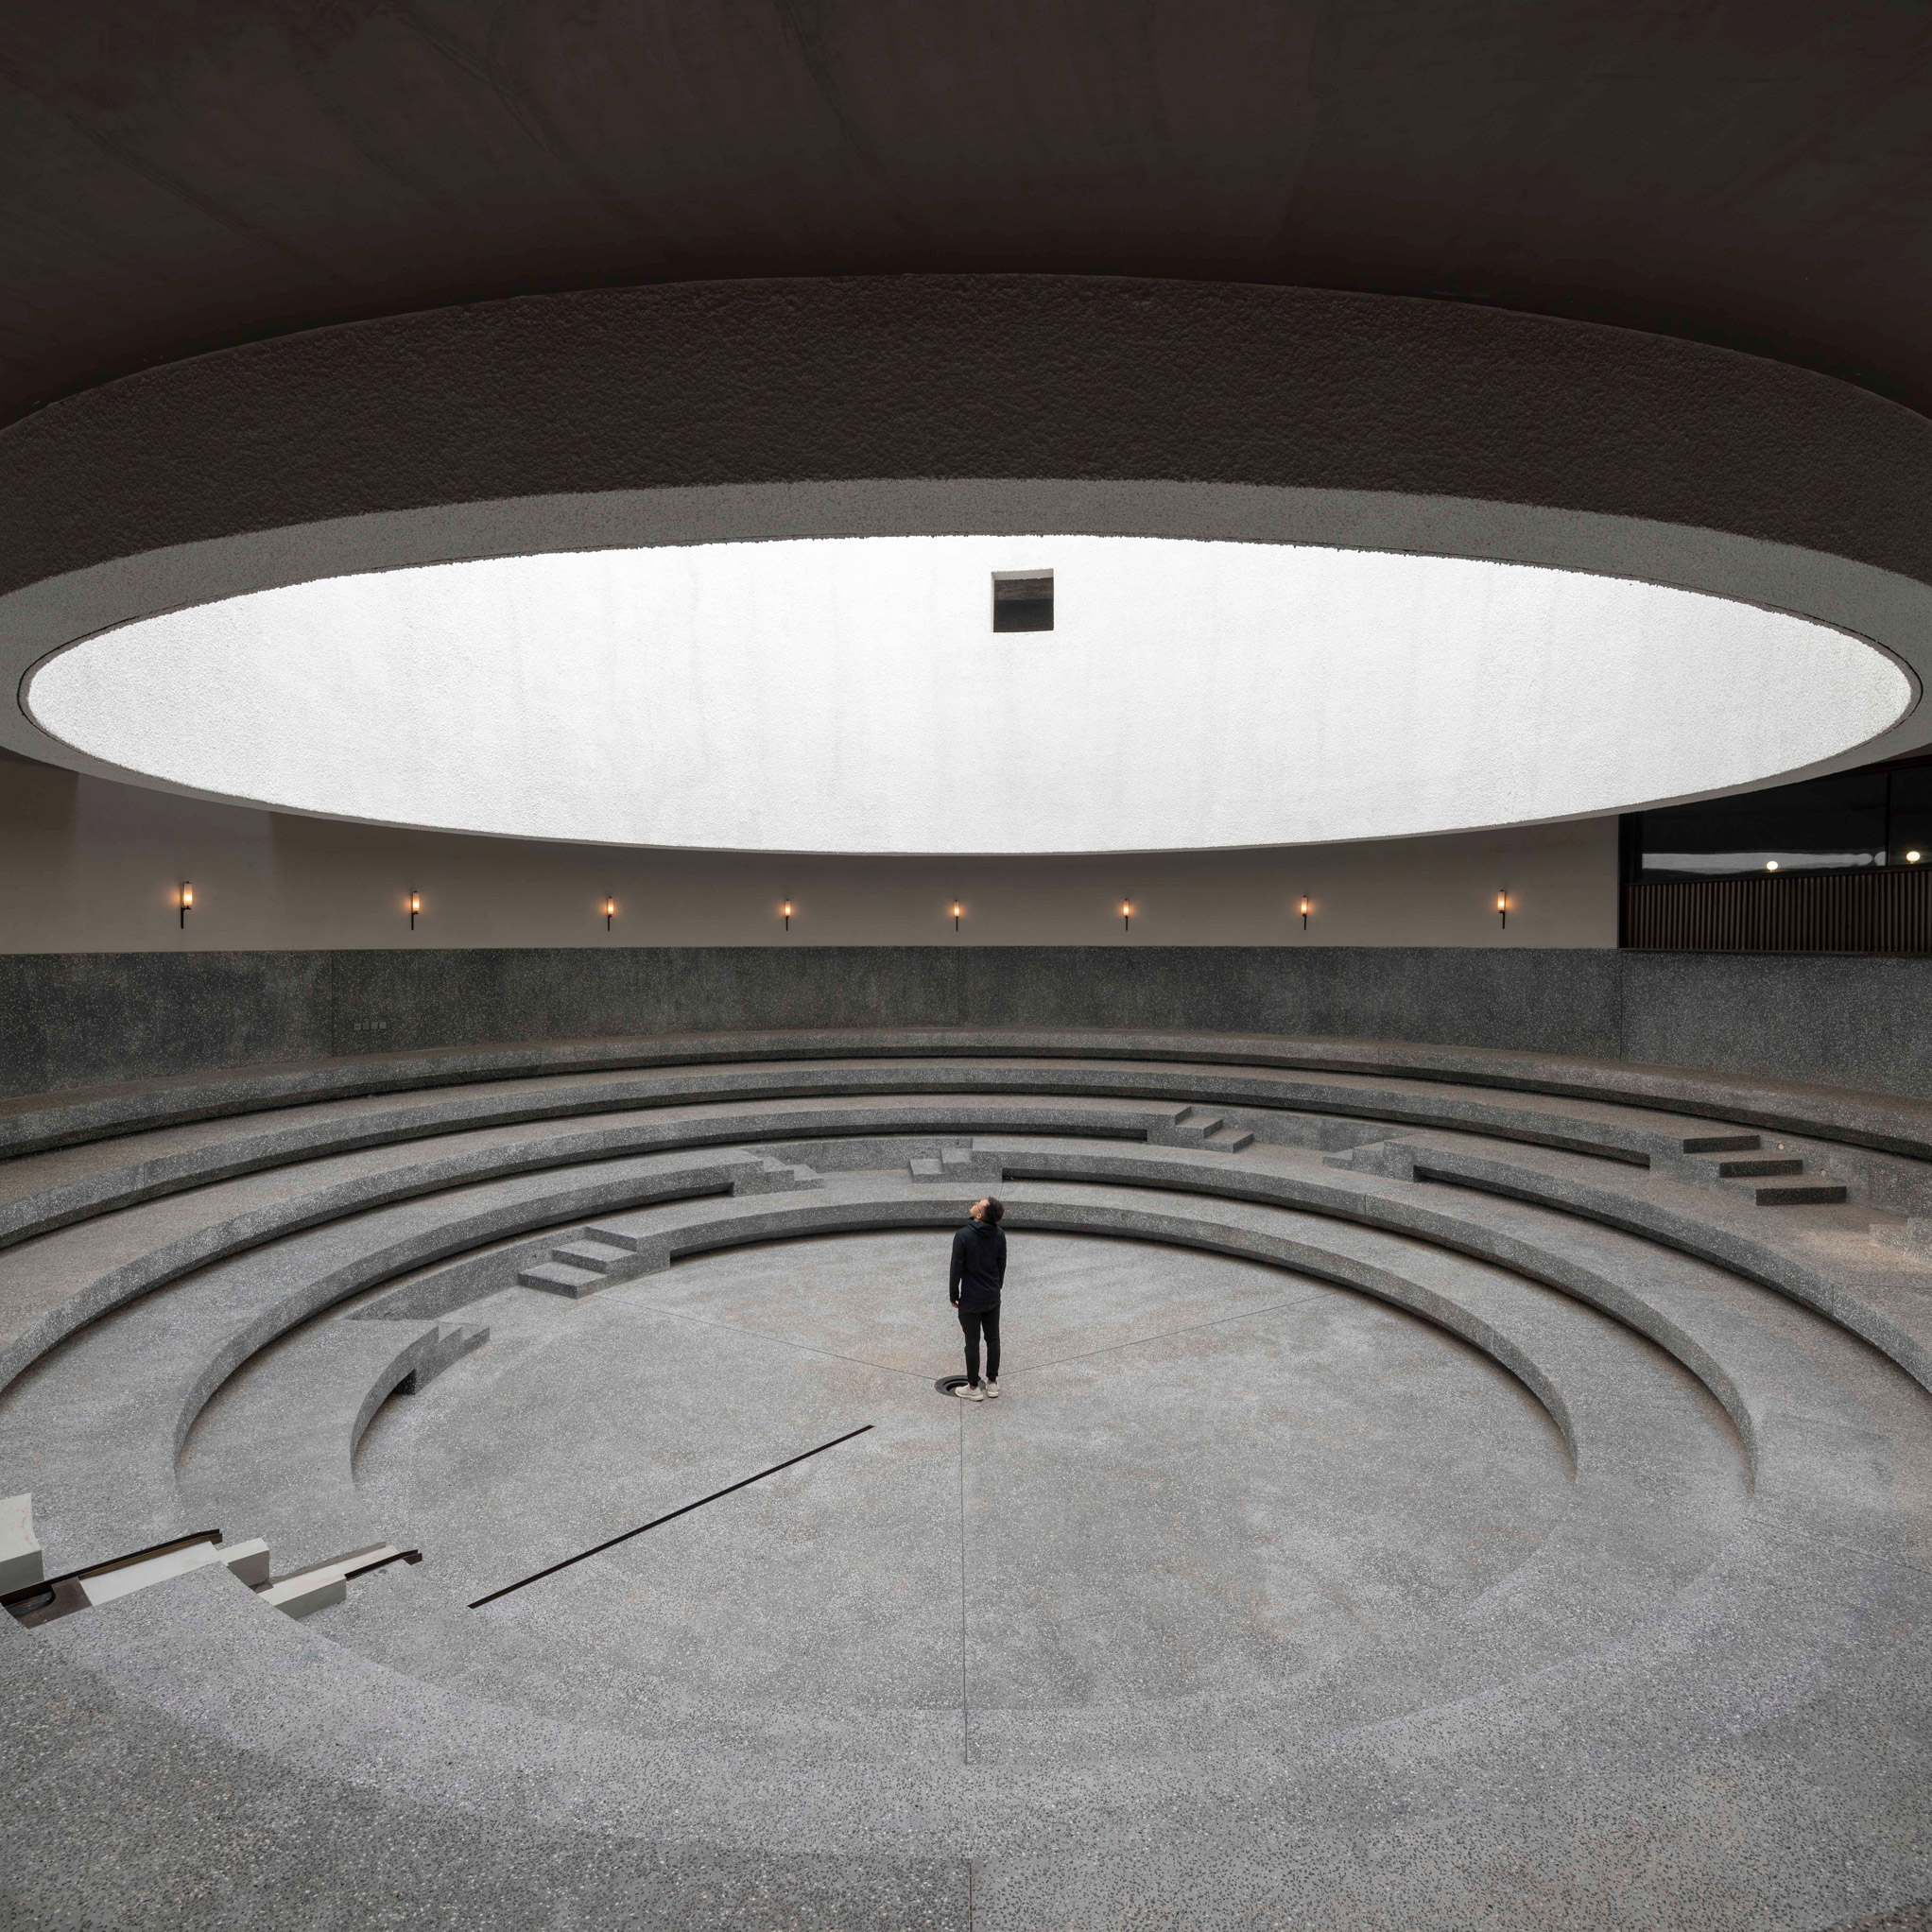 Dezeen's top 10 Chinese architecture projects of 2019: Aranya Art Center, Qinhuangdao, by Neri&Hu